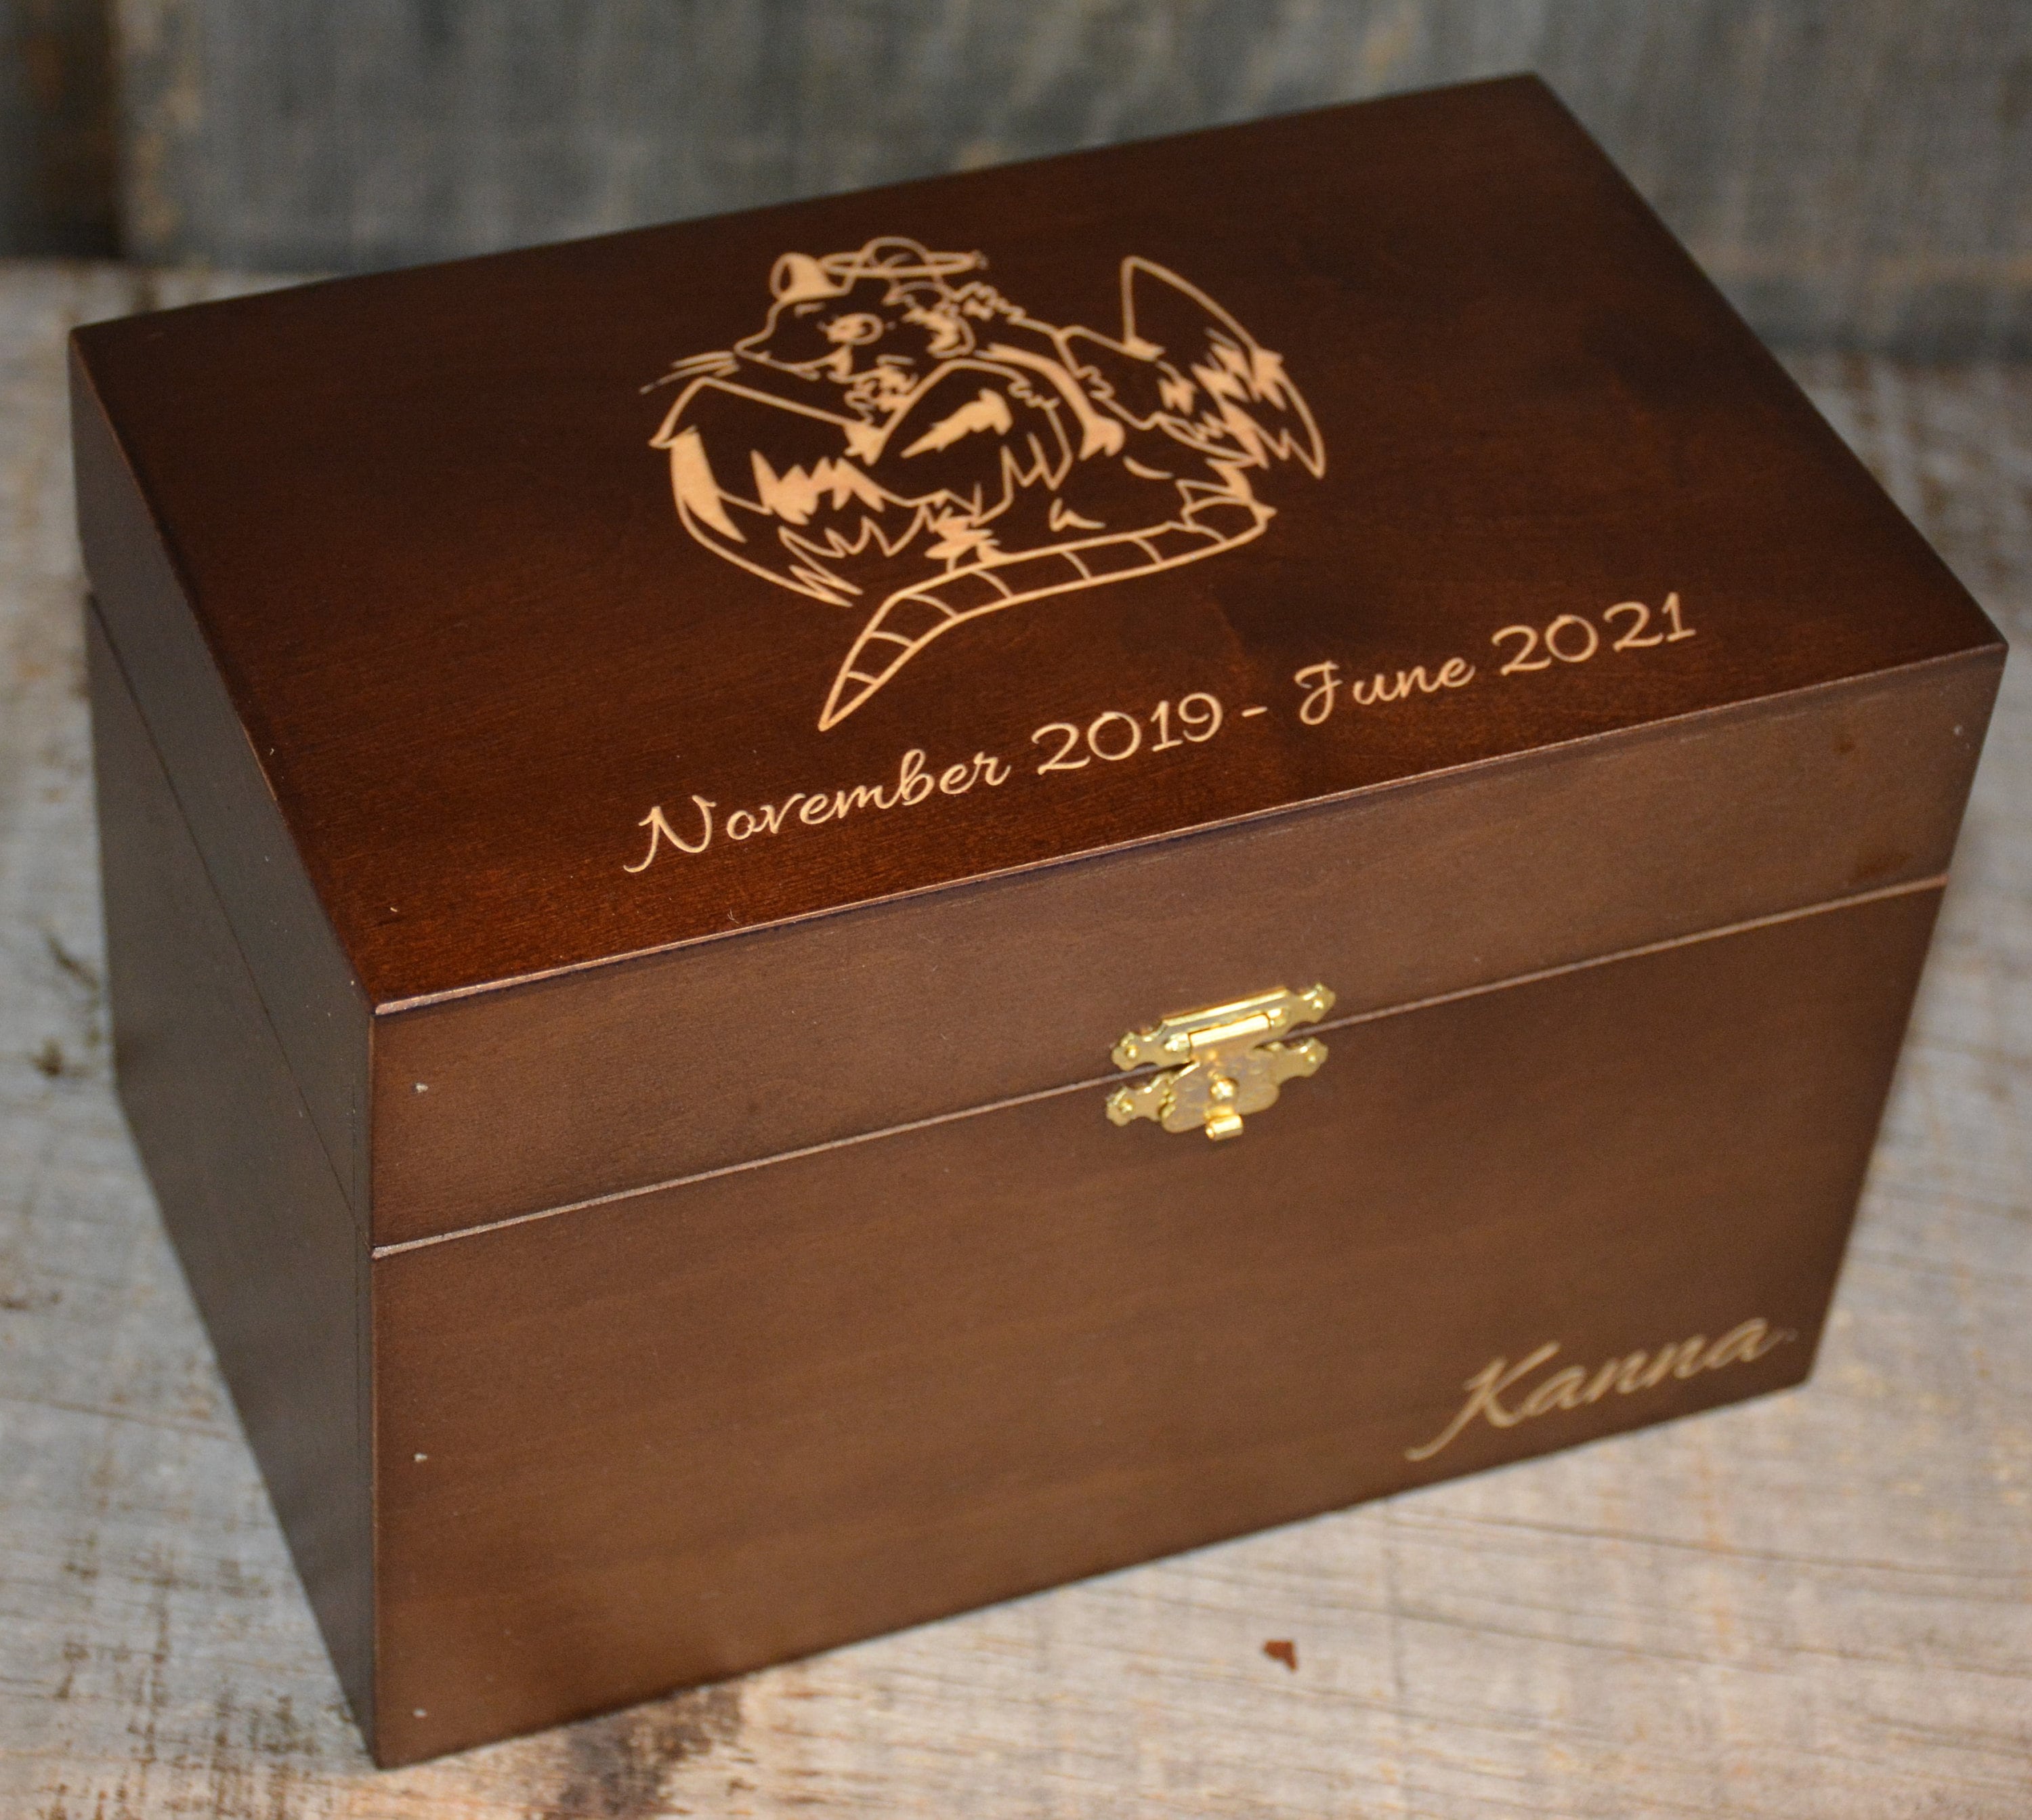 Engraved Plain & Painted Wooden Box Personalised Large and Small Trinket Boxes 